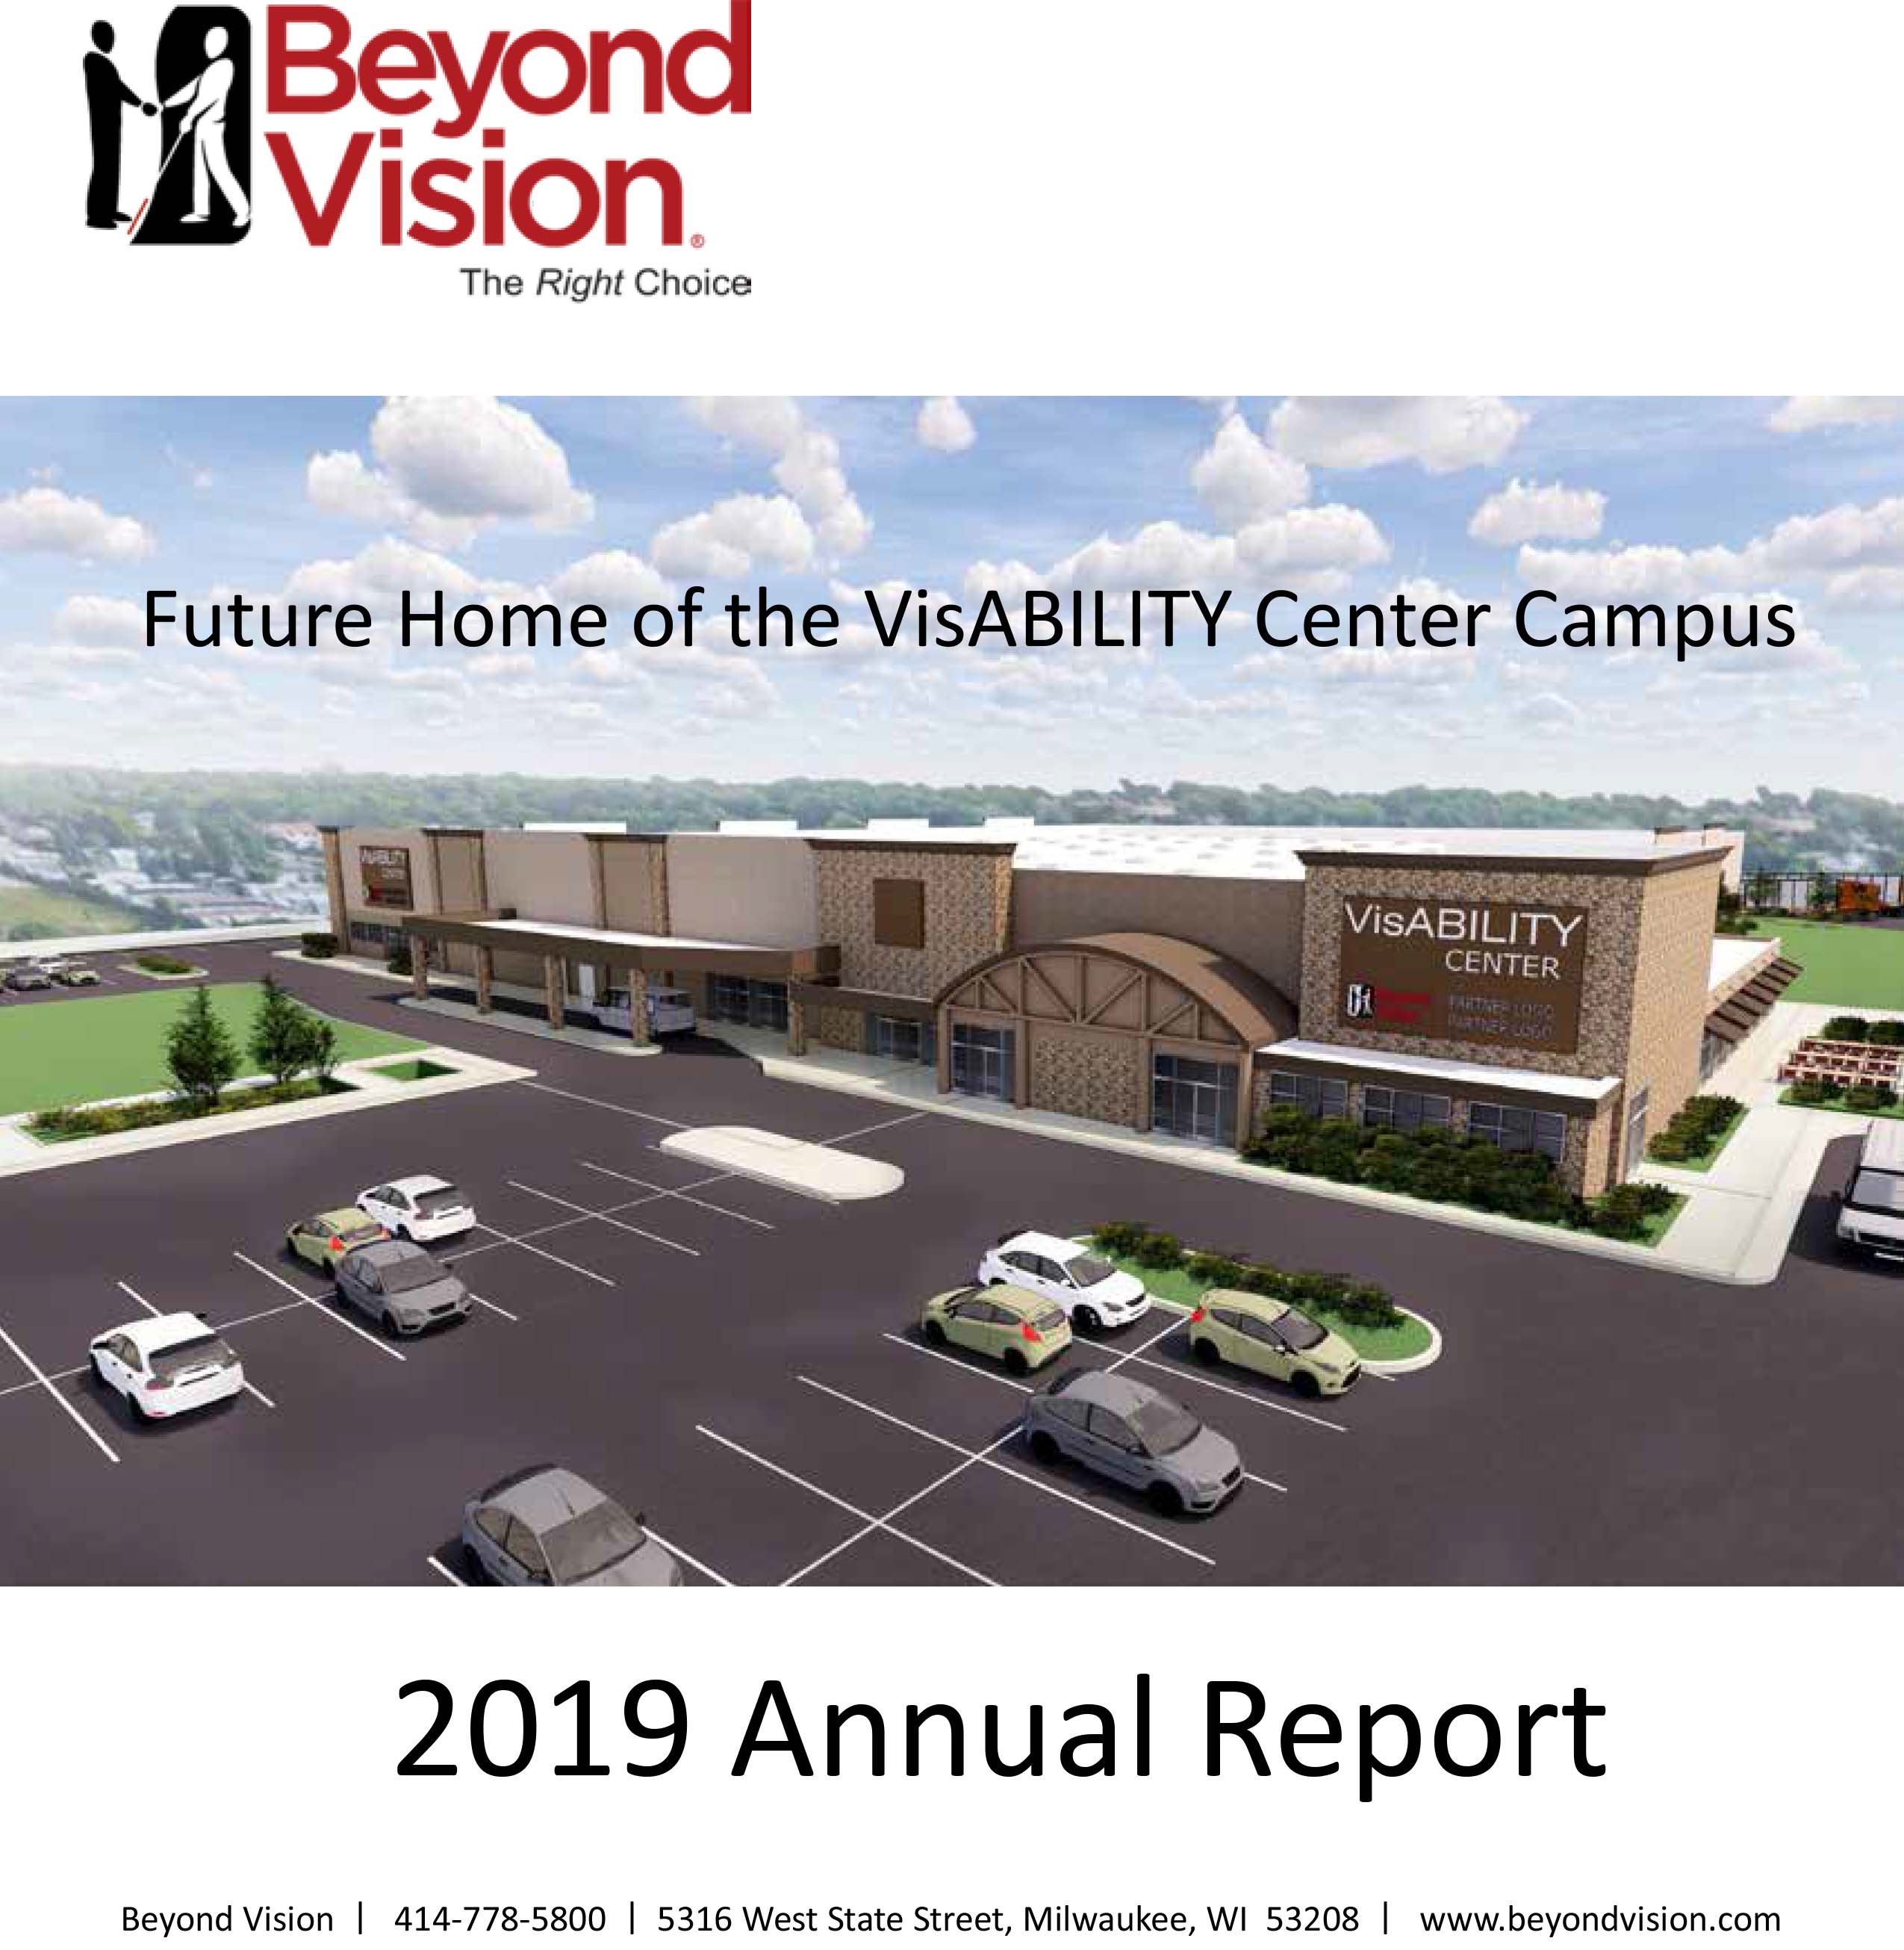 Cover of Beyond Vision 2019 Annual Report. Rendering of a new building with parking lot.